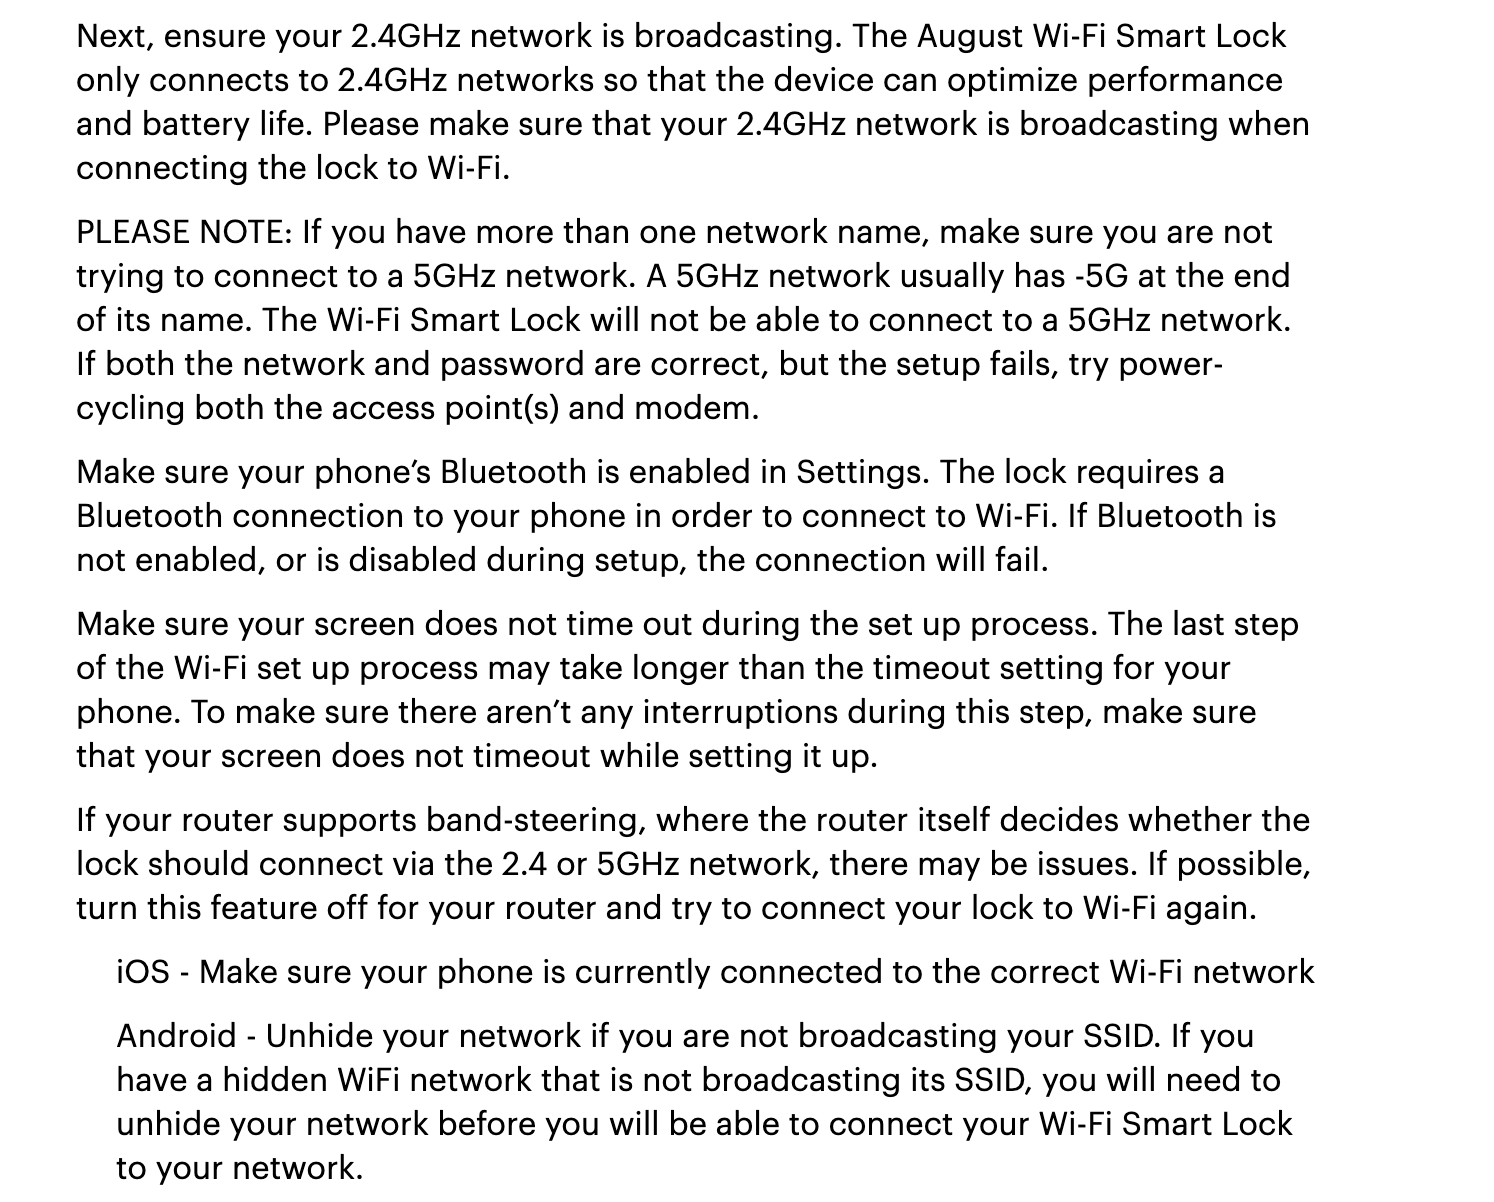 August Wi-Fi Lock Keeps Losing Connection [Fixed]  